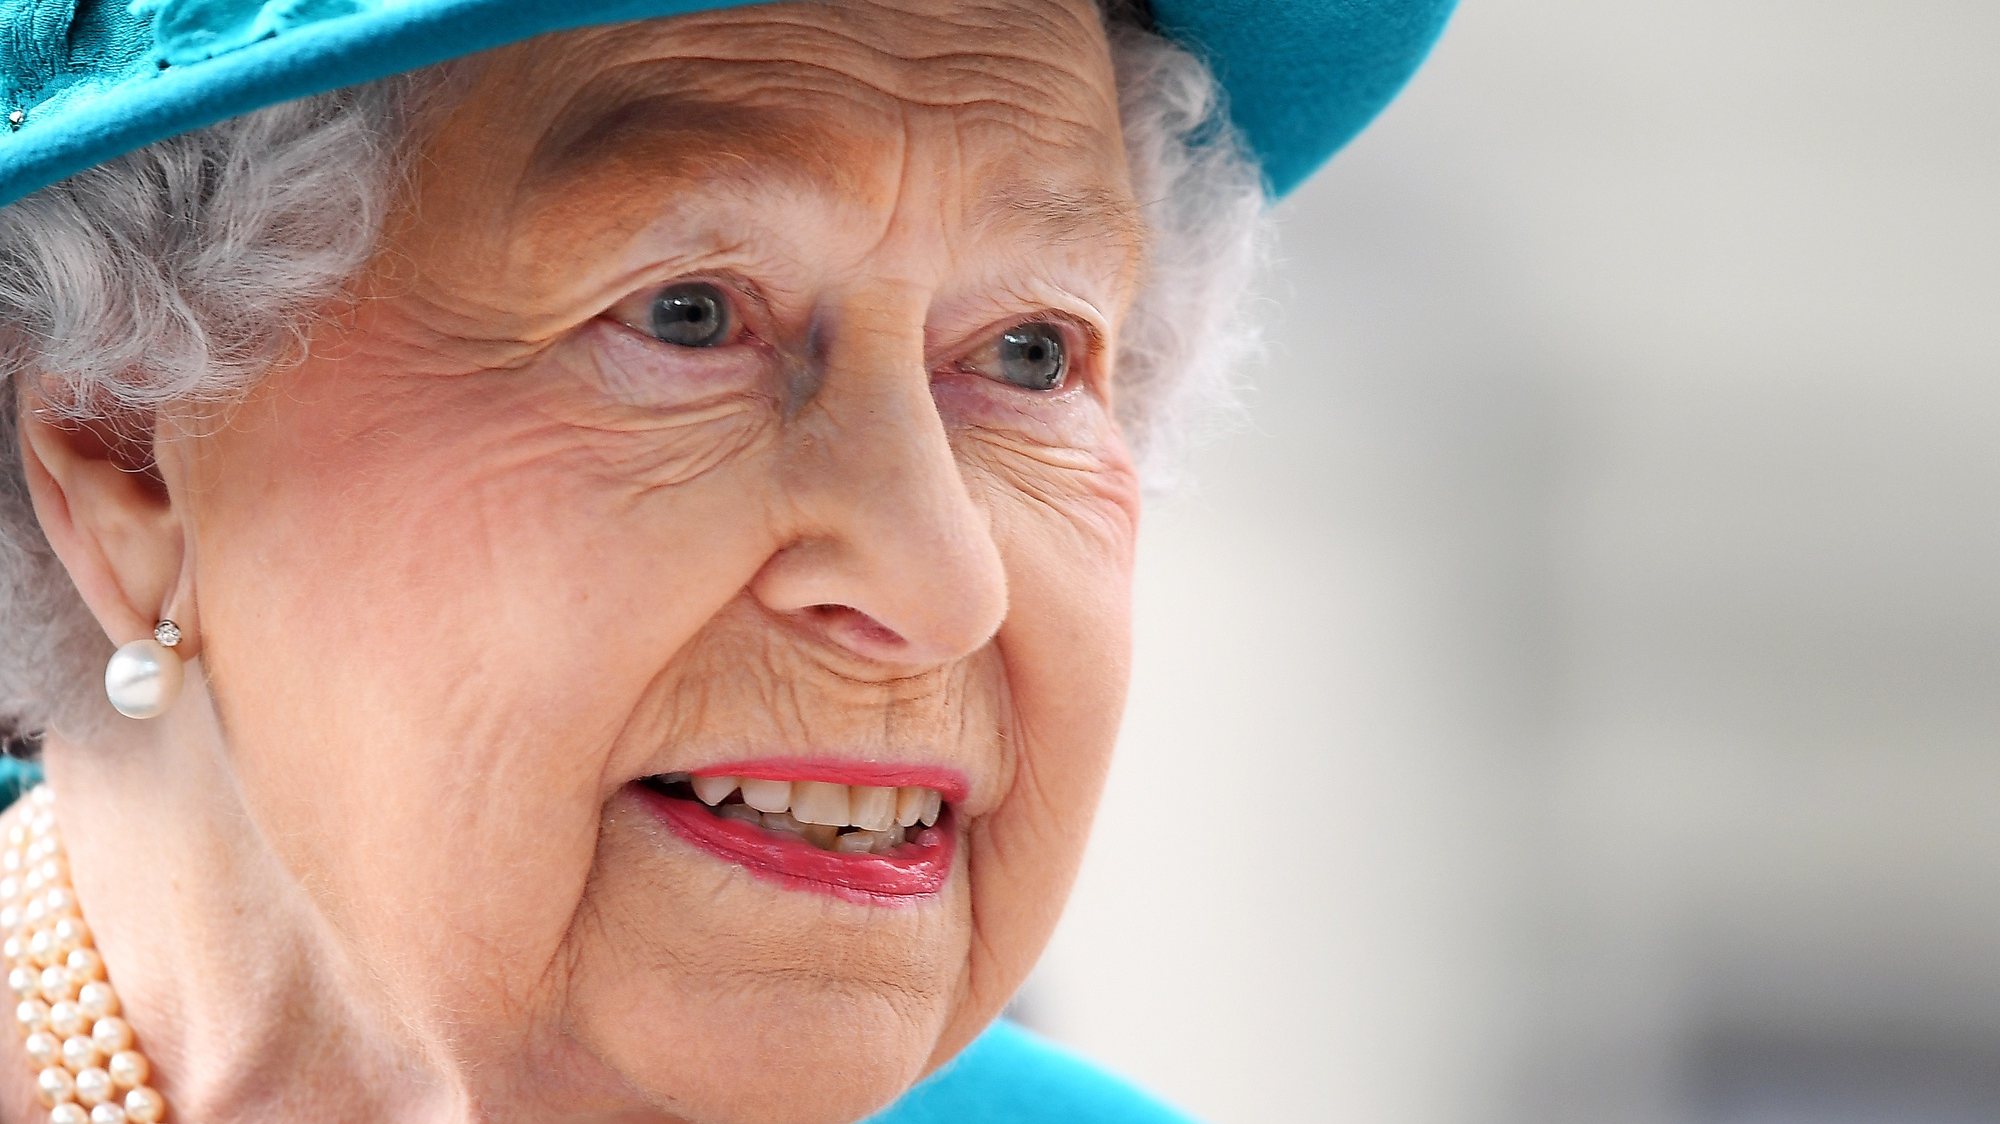 epa09774013 (FILE) - Britain&#039;s Queen Elizabeth II arrives to officially open the new Cyber Crime Security centre in London, Britain, 14 February 2017 (reissued 20 February 2022). The Buckingham Palace on 20 February 2022 confirmed the British monarch being tested positive for Covid-19. A spokersperson of the palace was cited as saying that Her Majesty, The Queen, was &#039;experiencing mild cold-like symptoms&#039; and that &#039;she expects to continue light duties at Windsor this week.&#039;  EPA/ANDY RAIN